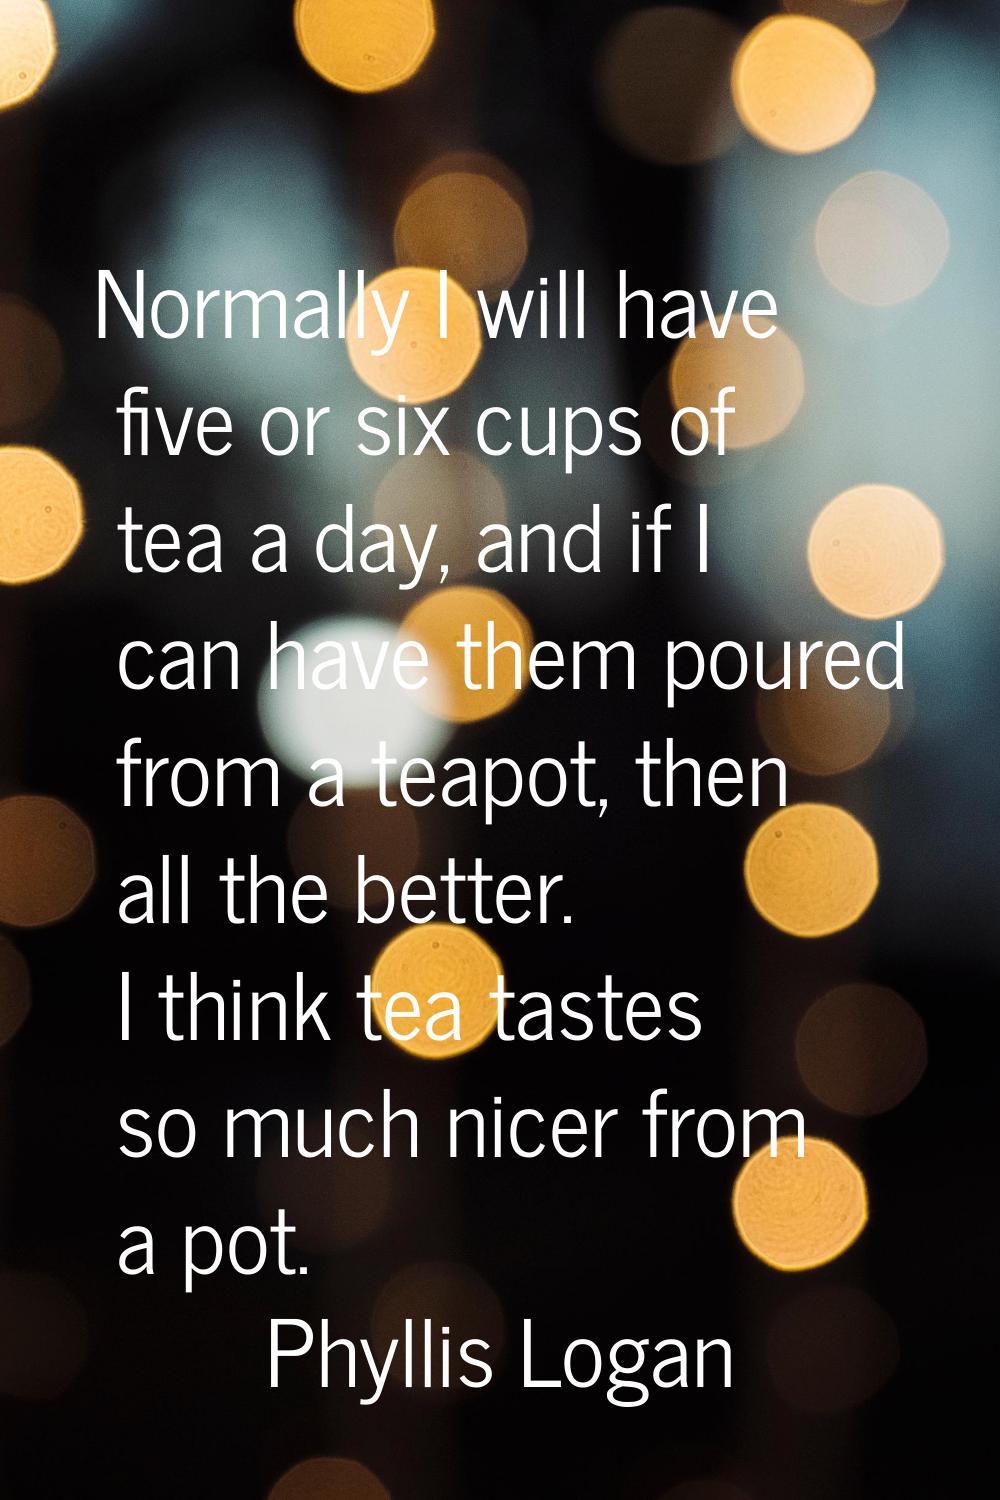 Normally I will have five or six cups of tea a day, and if I can have them poured from a teapot, th